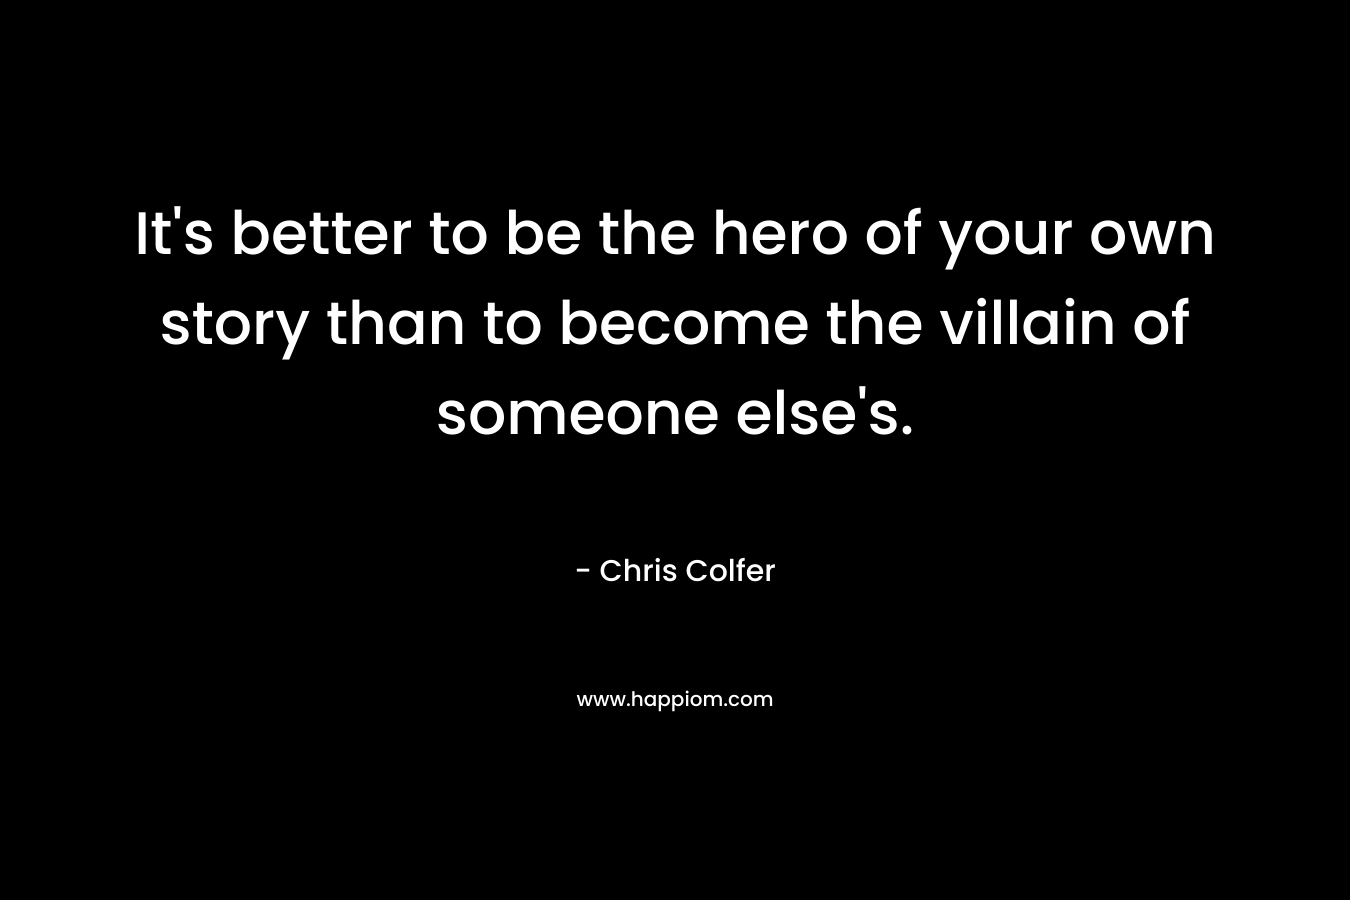 It's better to be the hero of your own story than to become the villain of someone else's.